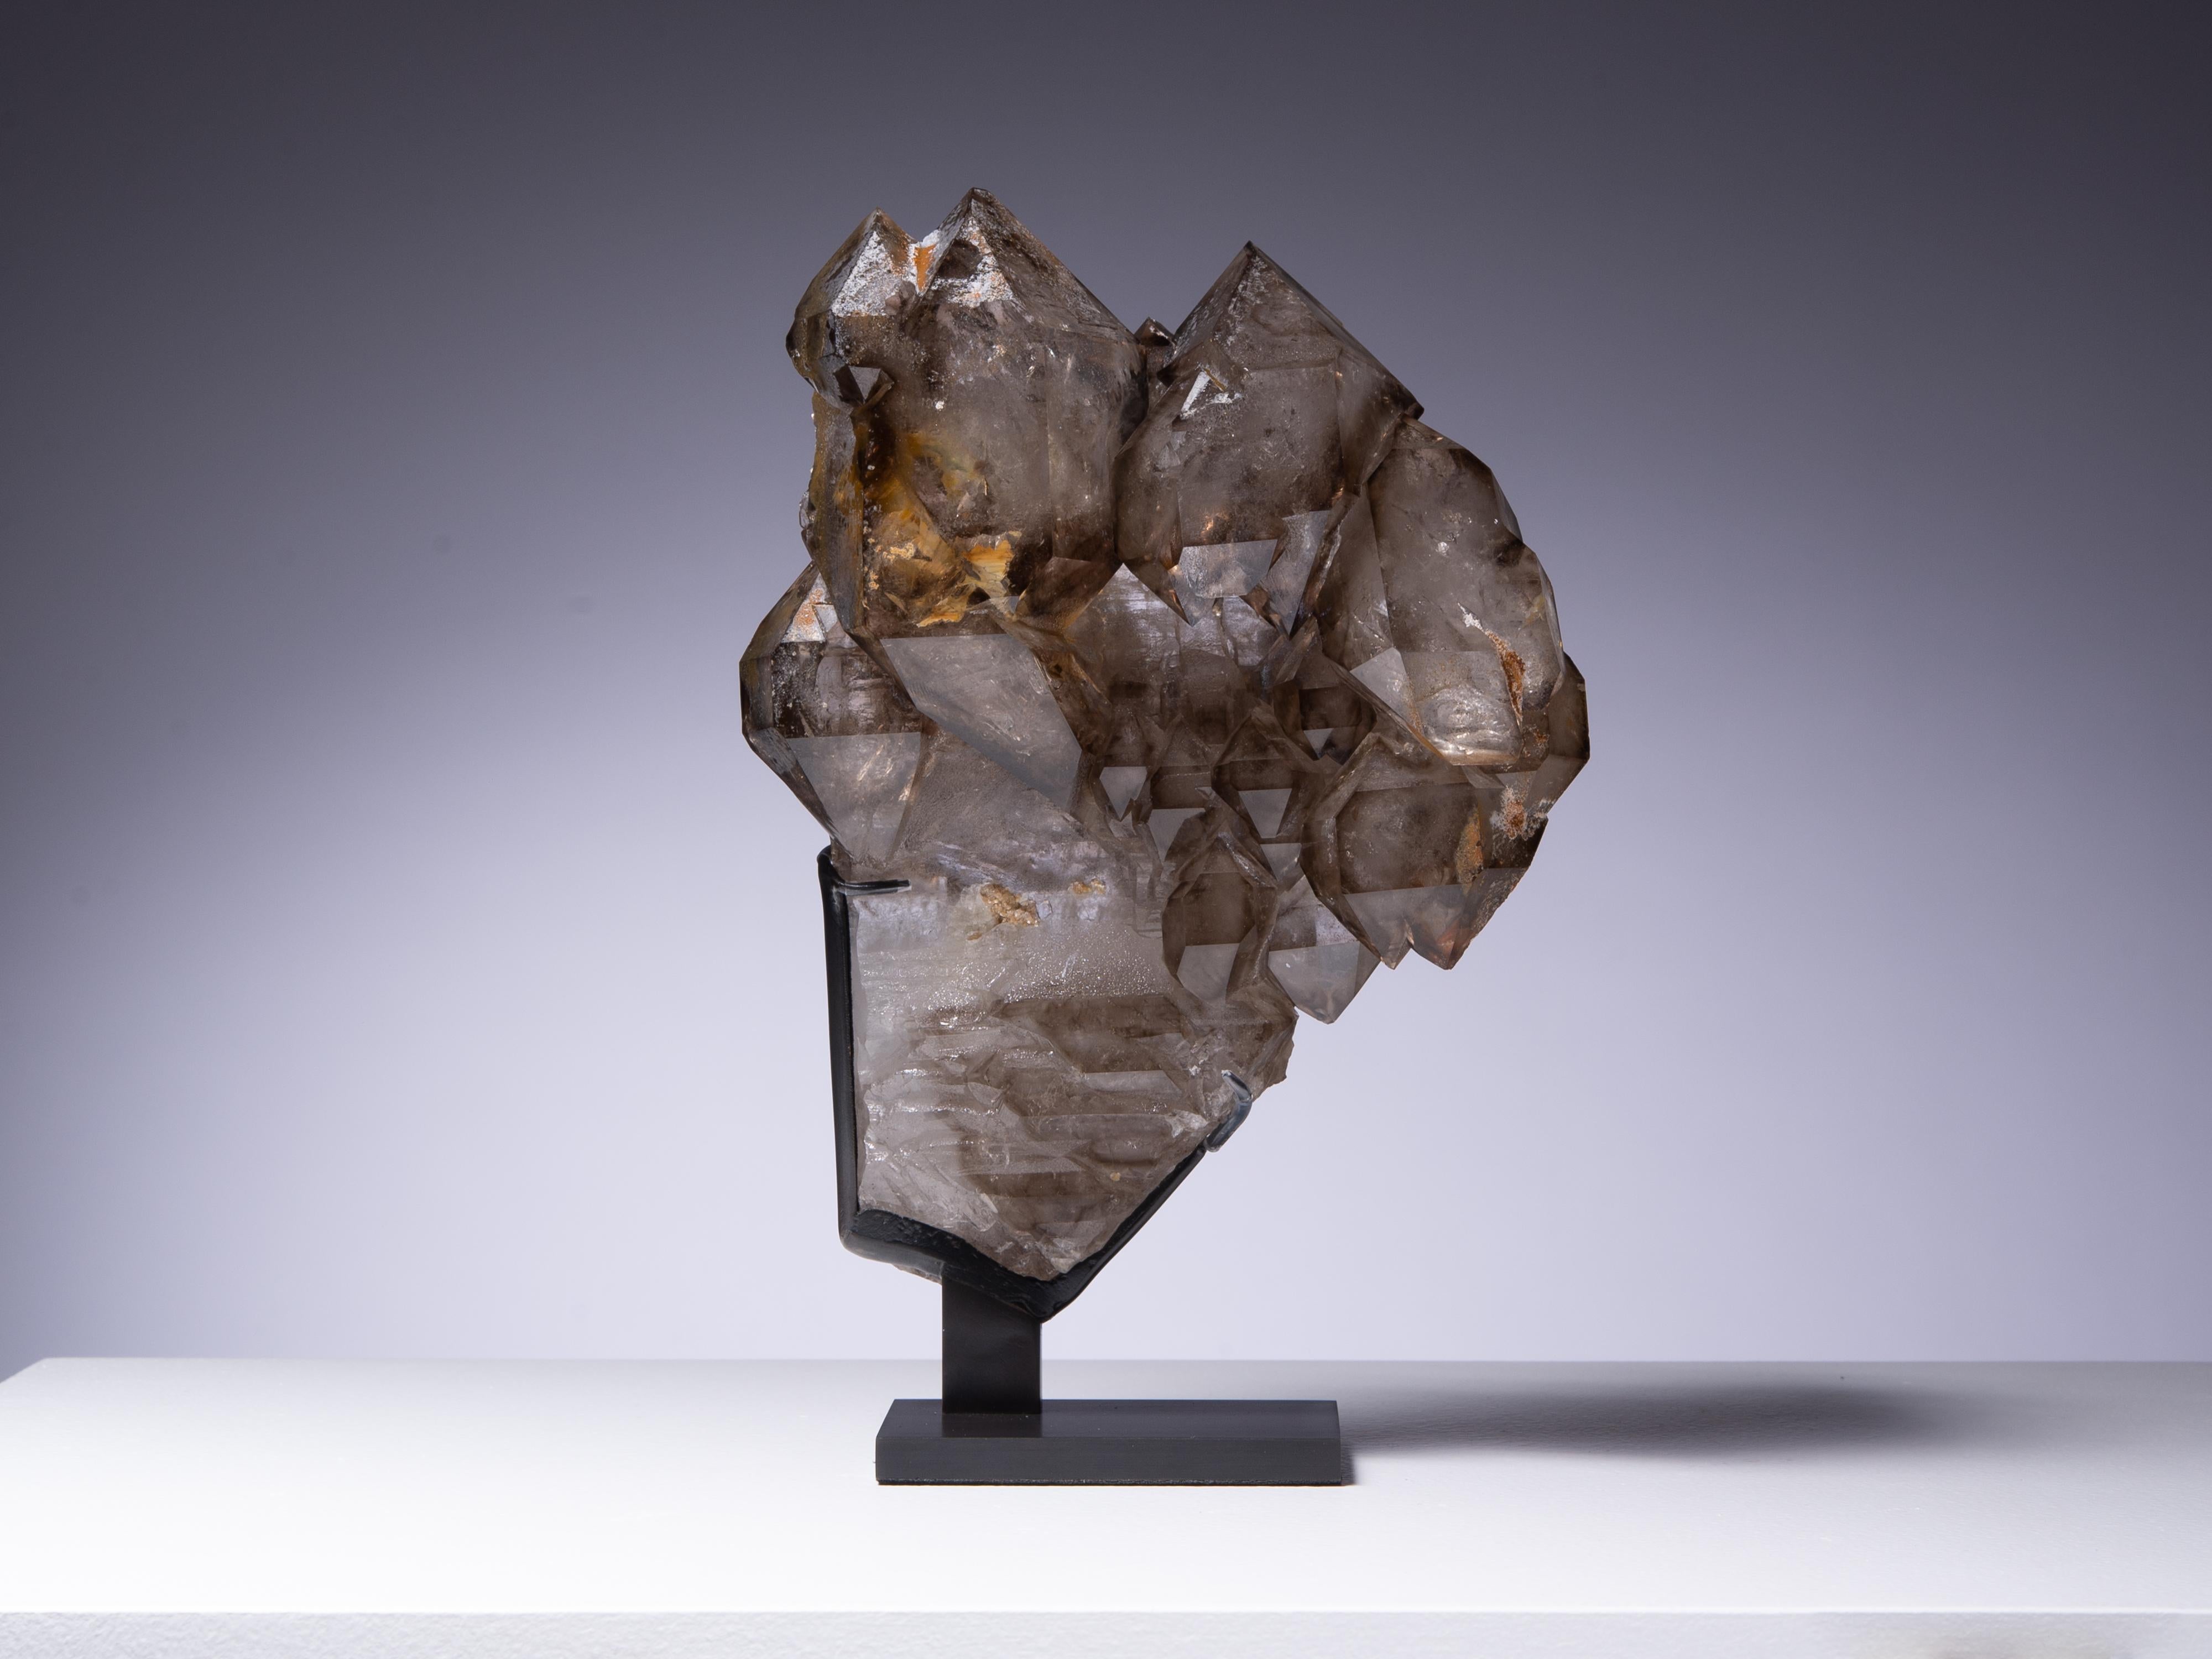 A gorgeous sculptural piece of elestial quartz. So-called elestial quartz originates from Brazil and is admired for its three-dimensional quality and transparent-smokey appearance. A strong, sculptural piece.

This piece was legally and ethically